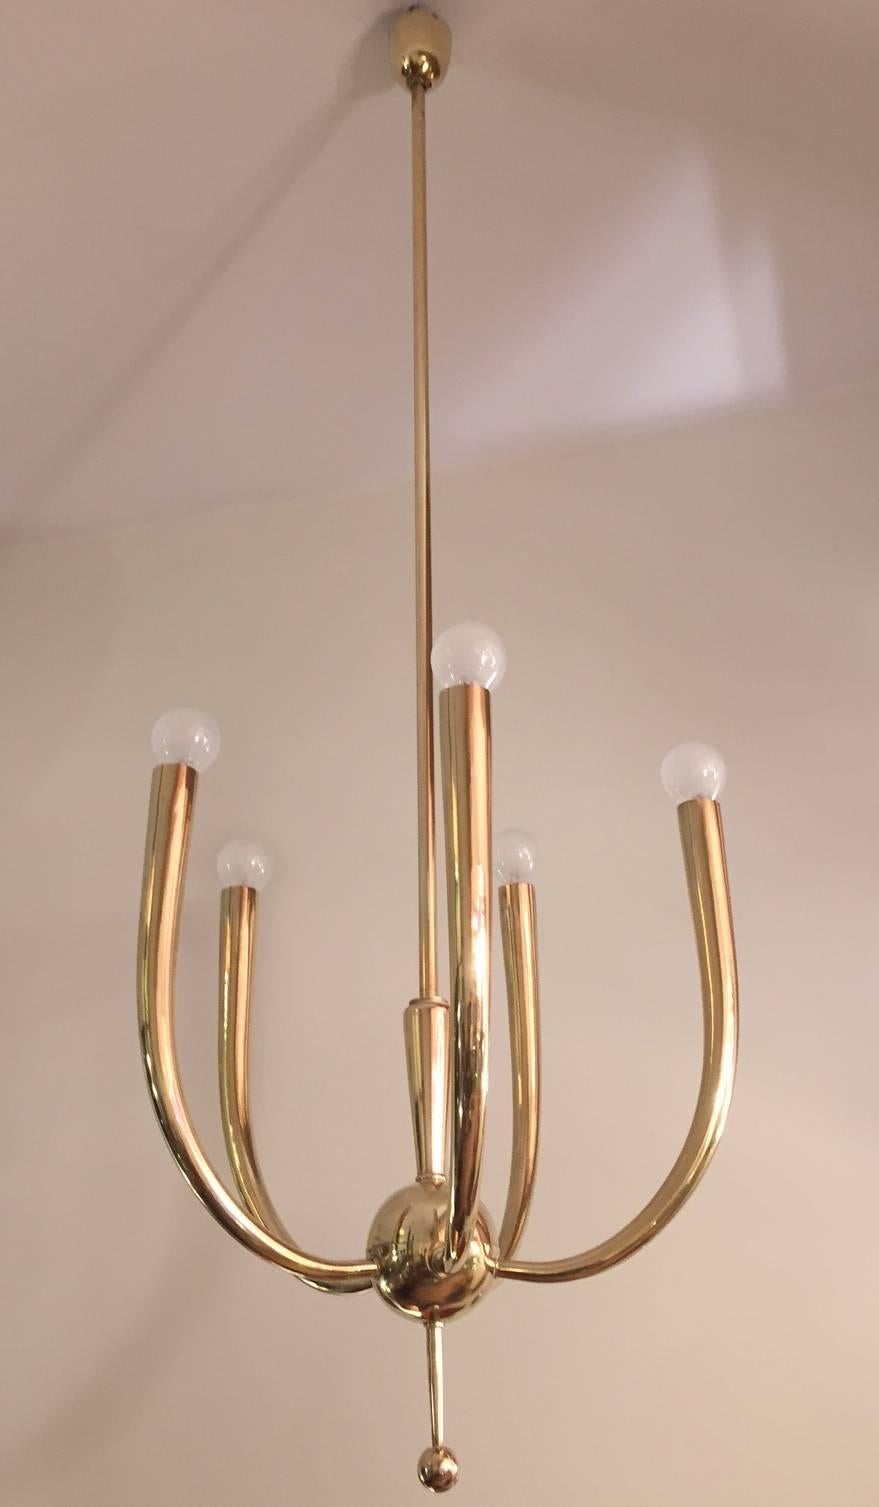 A brass ceiling chandelier designed by Oscar Torlasco for Lumi. Edited in 1940s.
The chandelier has been rewired and polished. Excellent condition.
Shipping to USA: 320 Euros.
Shipping to Europe :220 Euros.